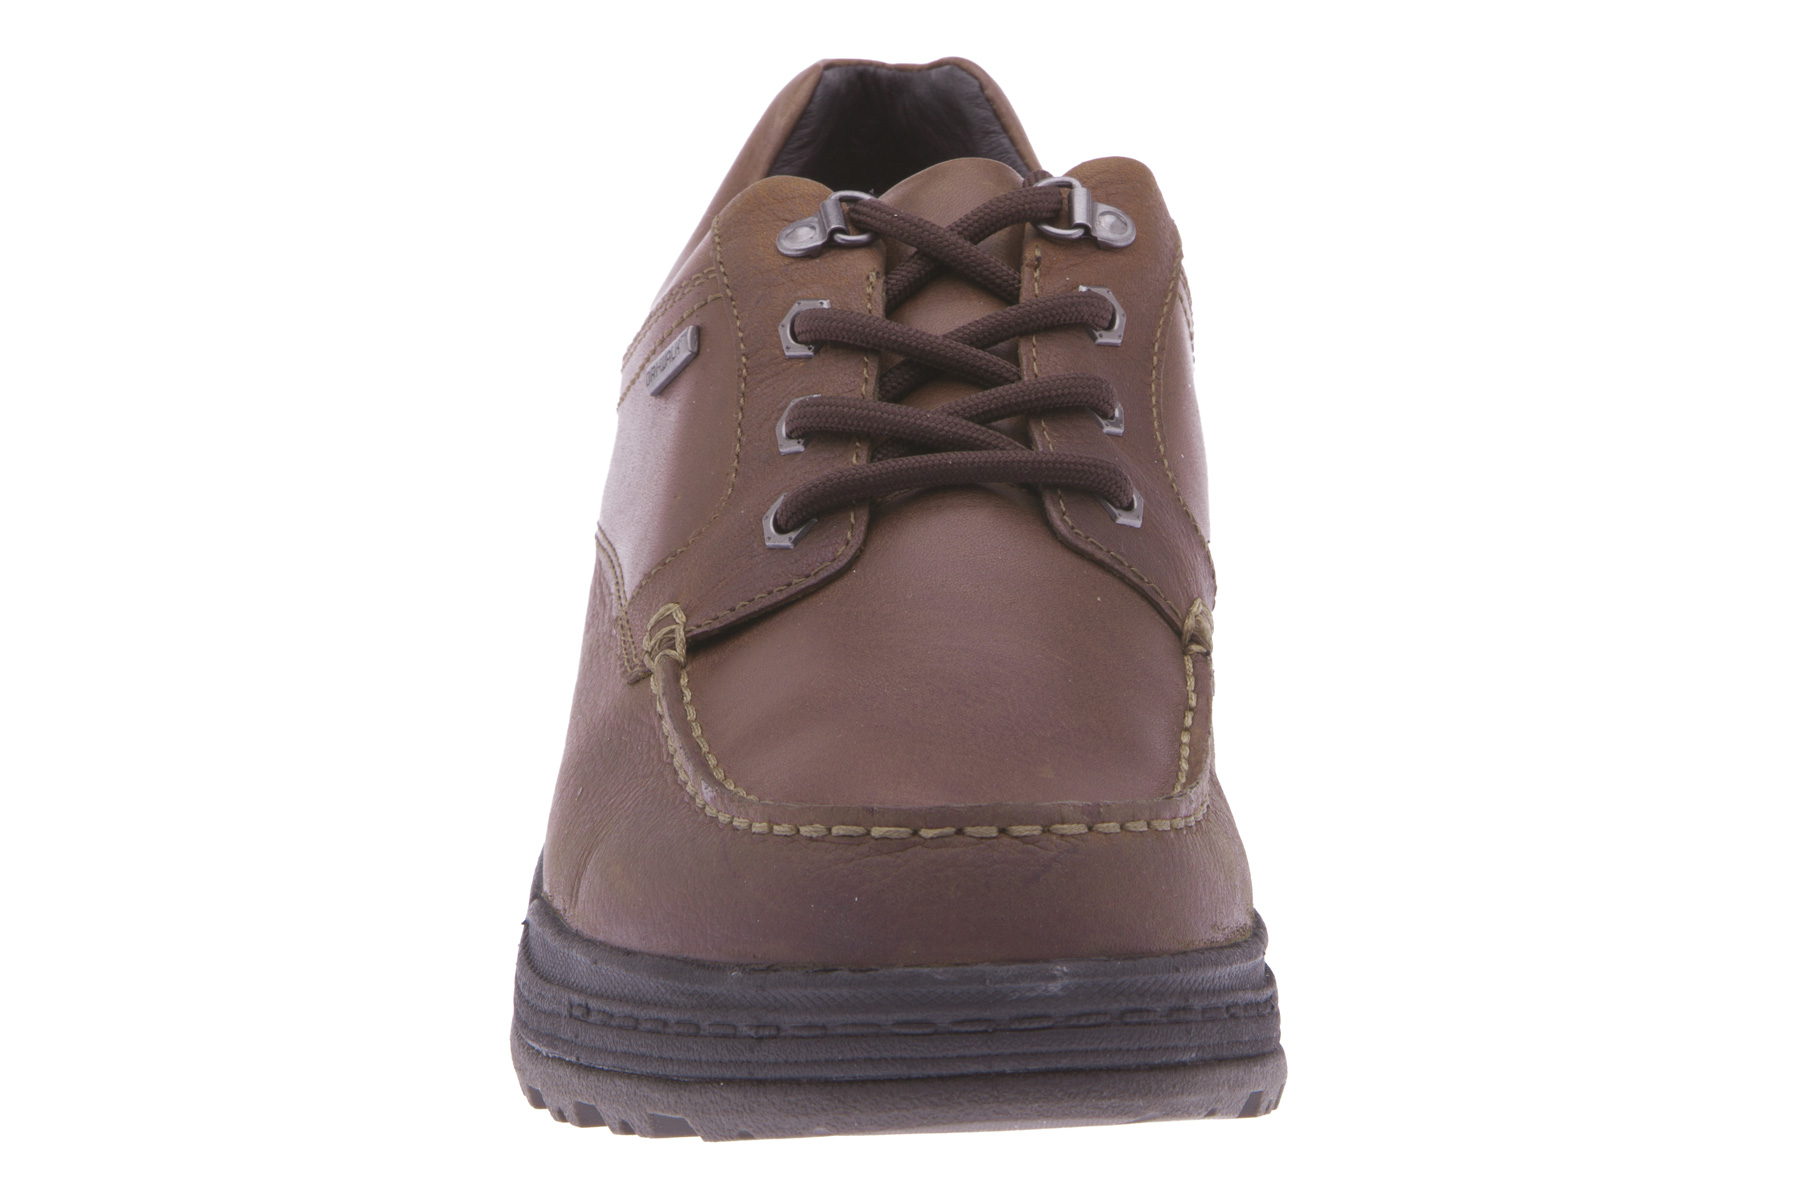 ABEO  Rayburn - Casual Shoes in Brown - image 5 of 6